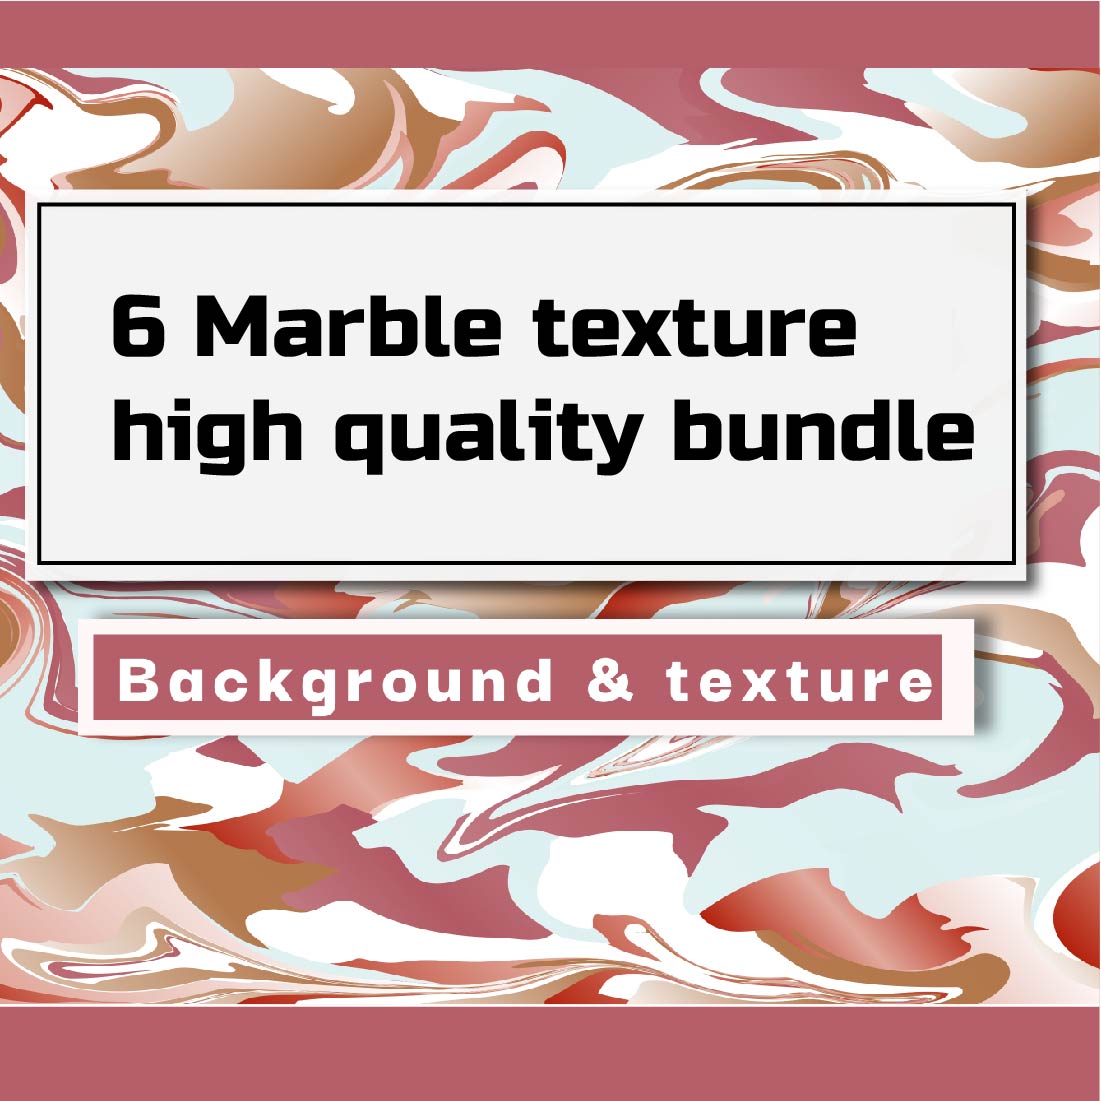 6 marble background and texture bundle cover image.